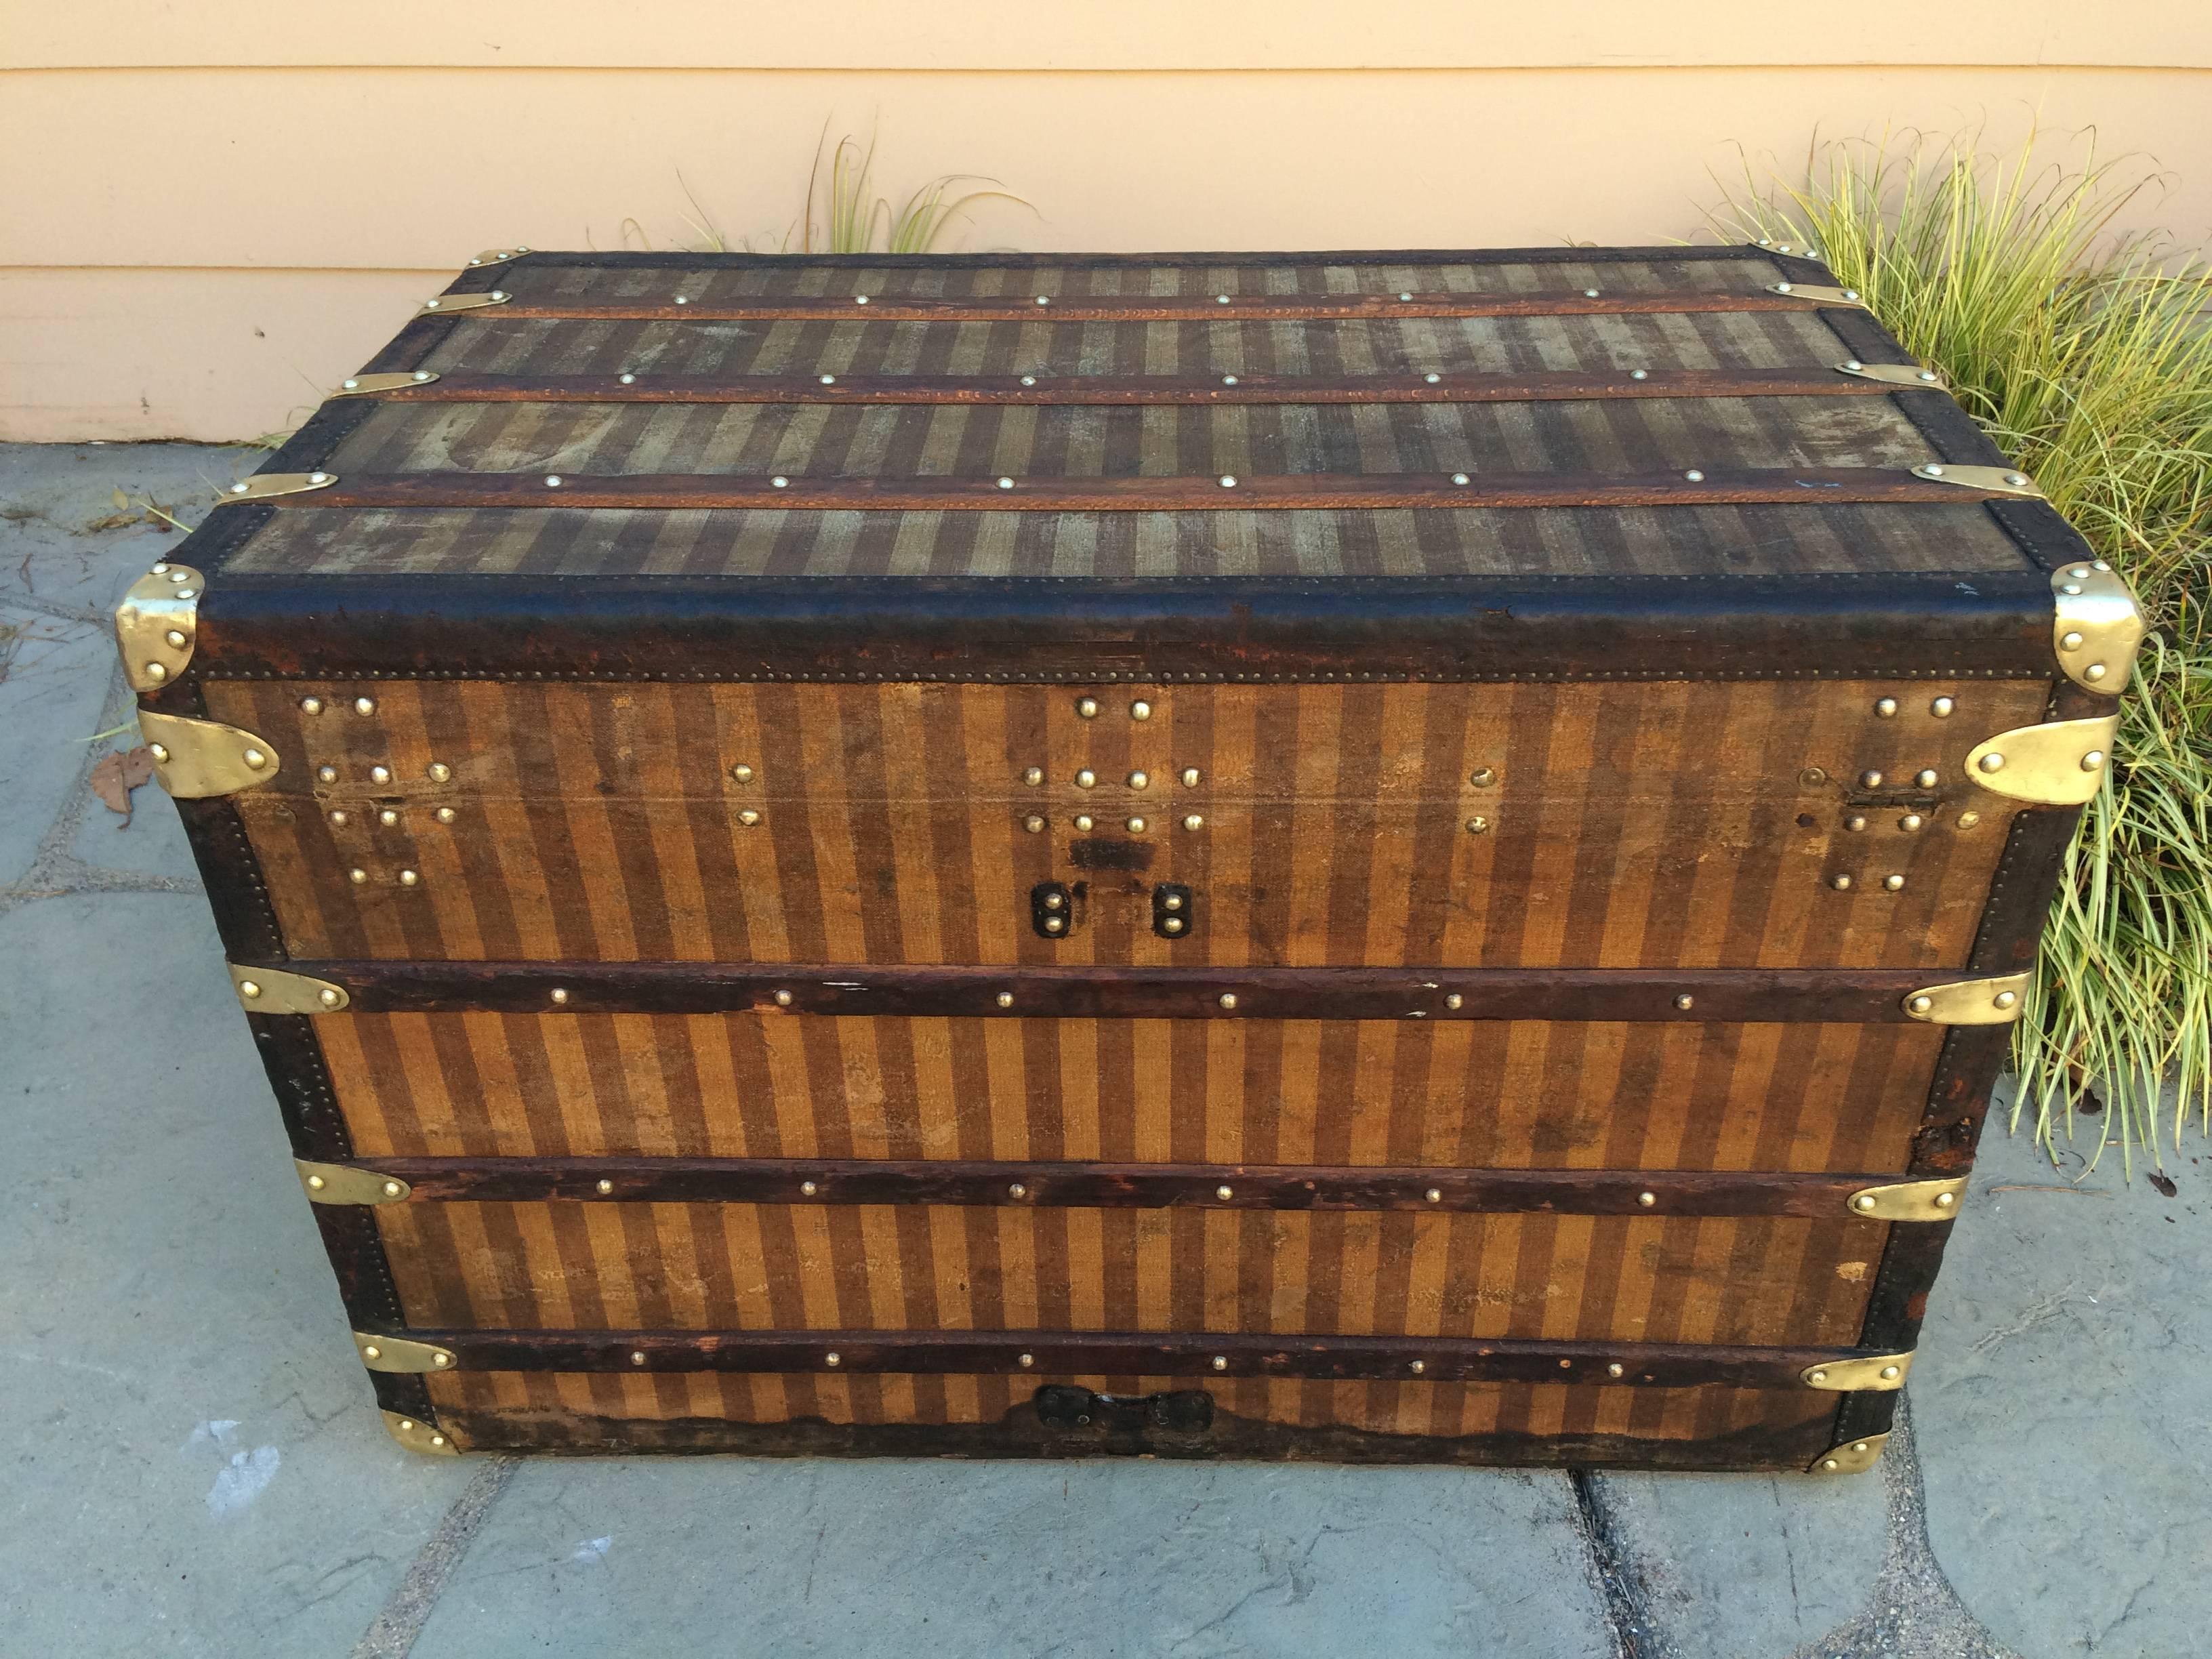 Louis Vuitton Rayee Steamer Trunk  In Good Condition For Sale In Carmel-by-the-sea, CA